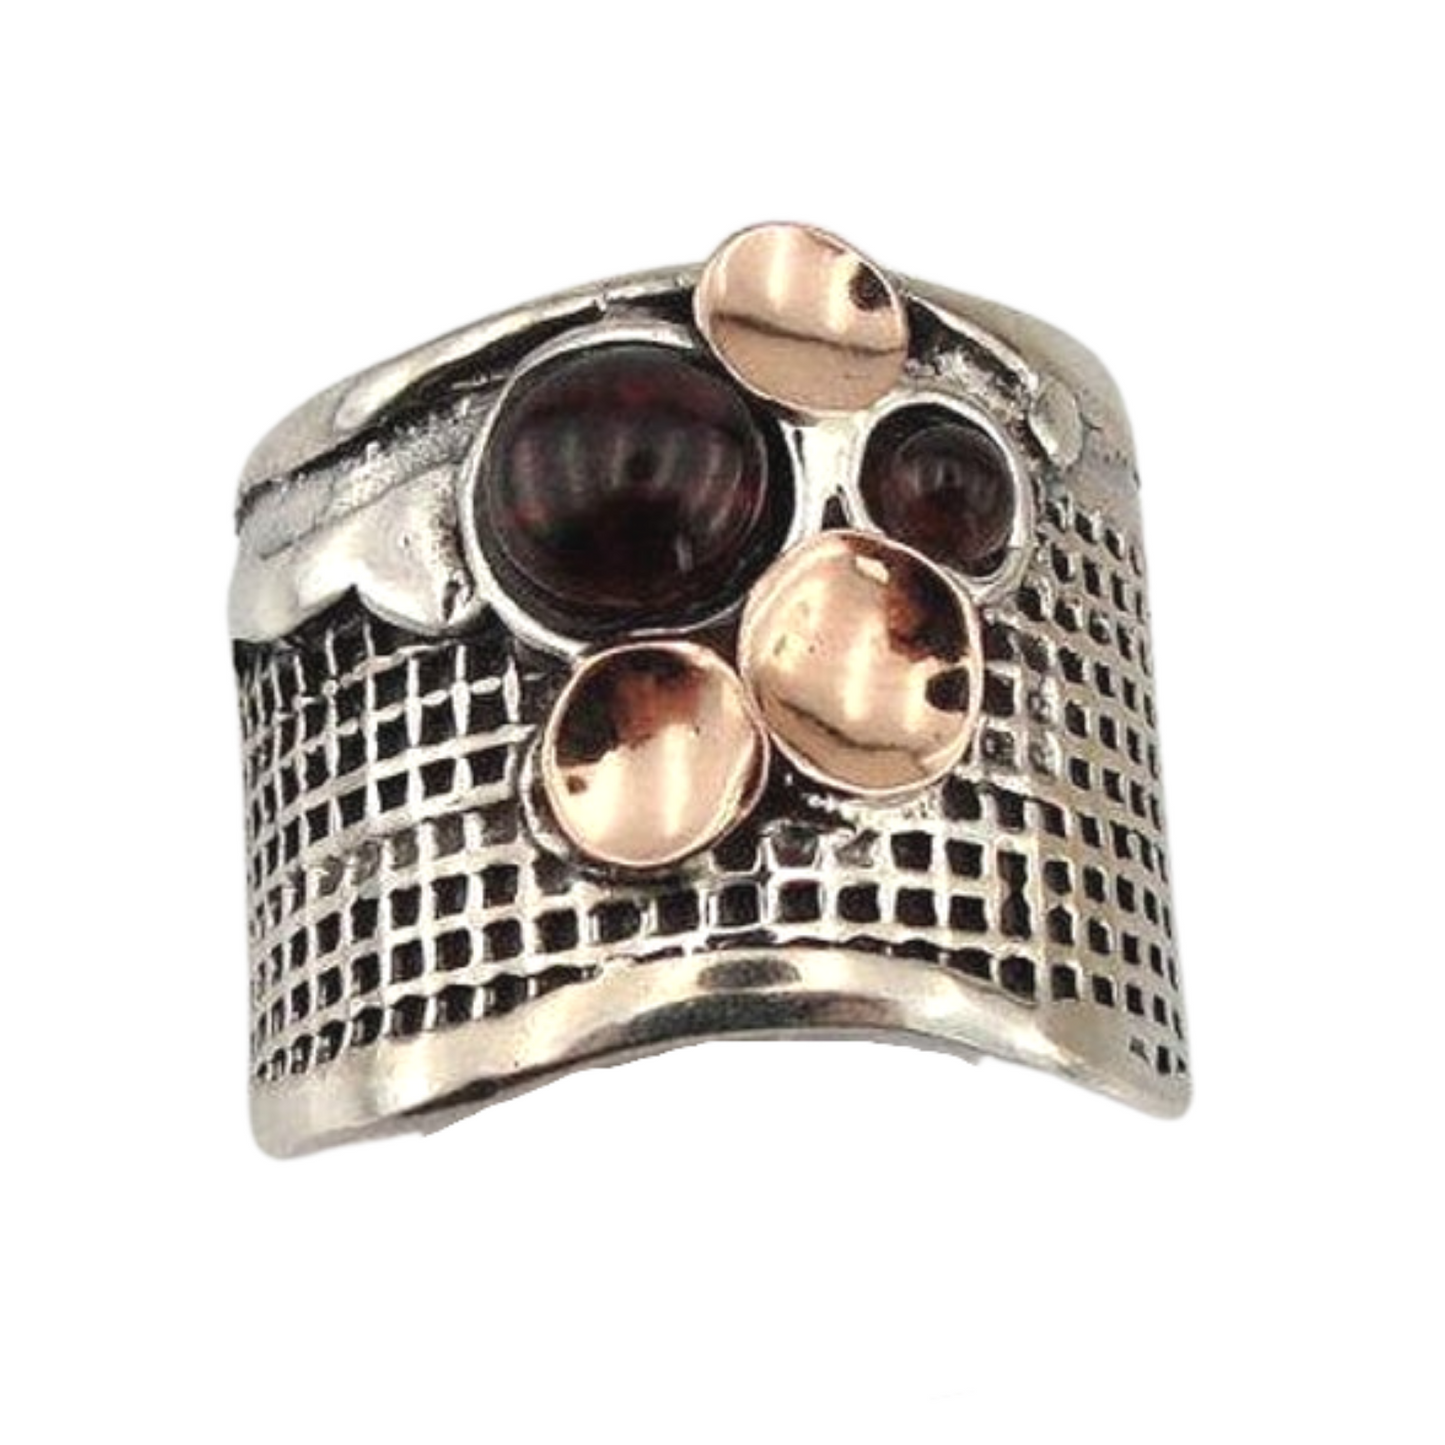 Wide Textured Silver Ring, Decorated with Red Gold And Natural Garnet Gemstones